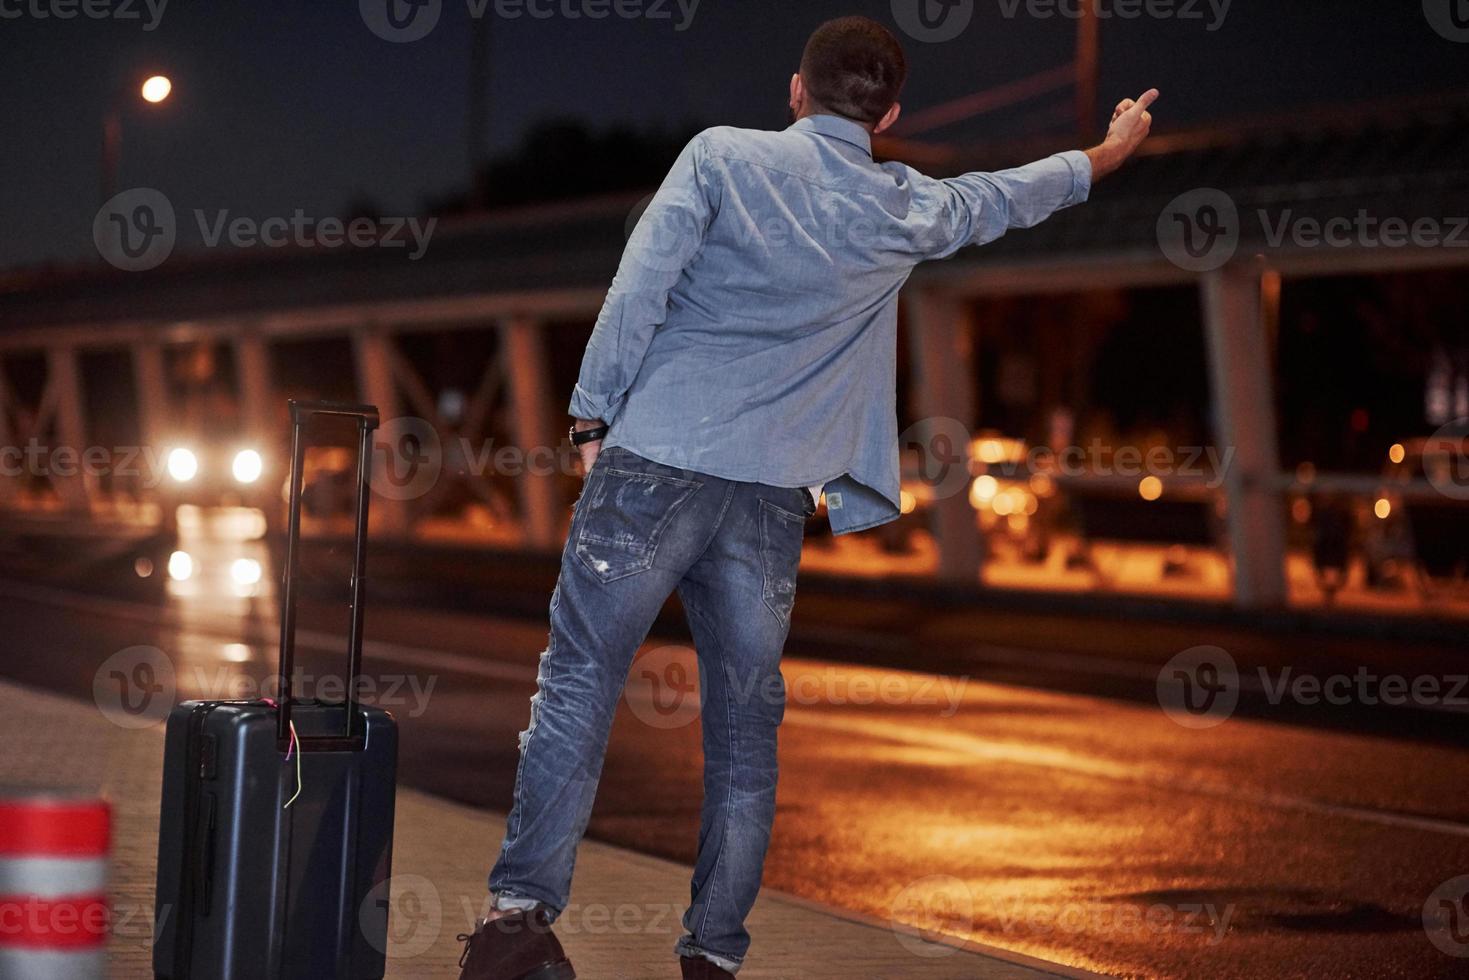 Unfortunately there is car at other side of the road. Short-haired man in jeans and a shirt with a baggage tries to catch the car photo